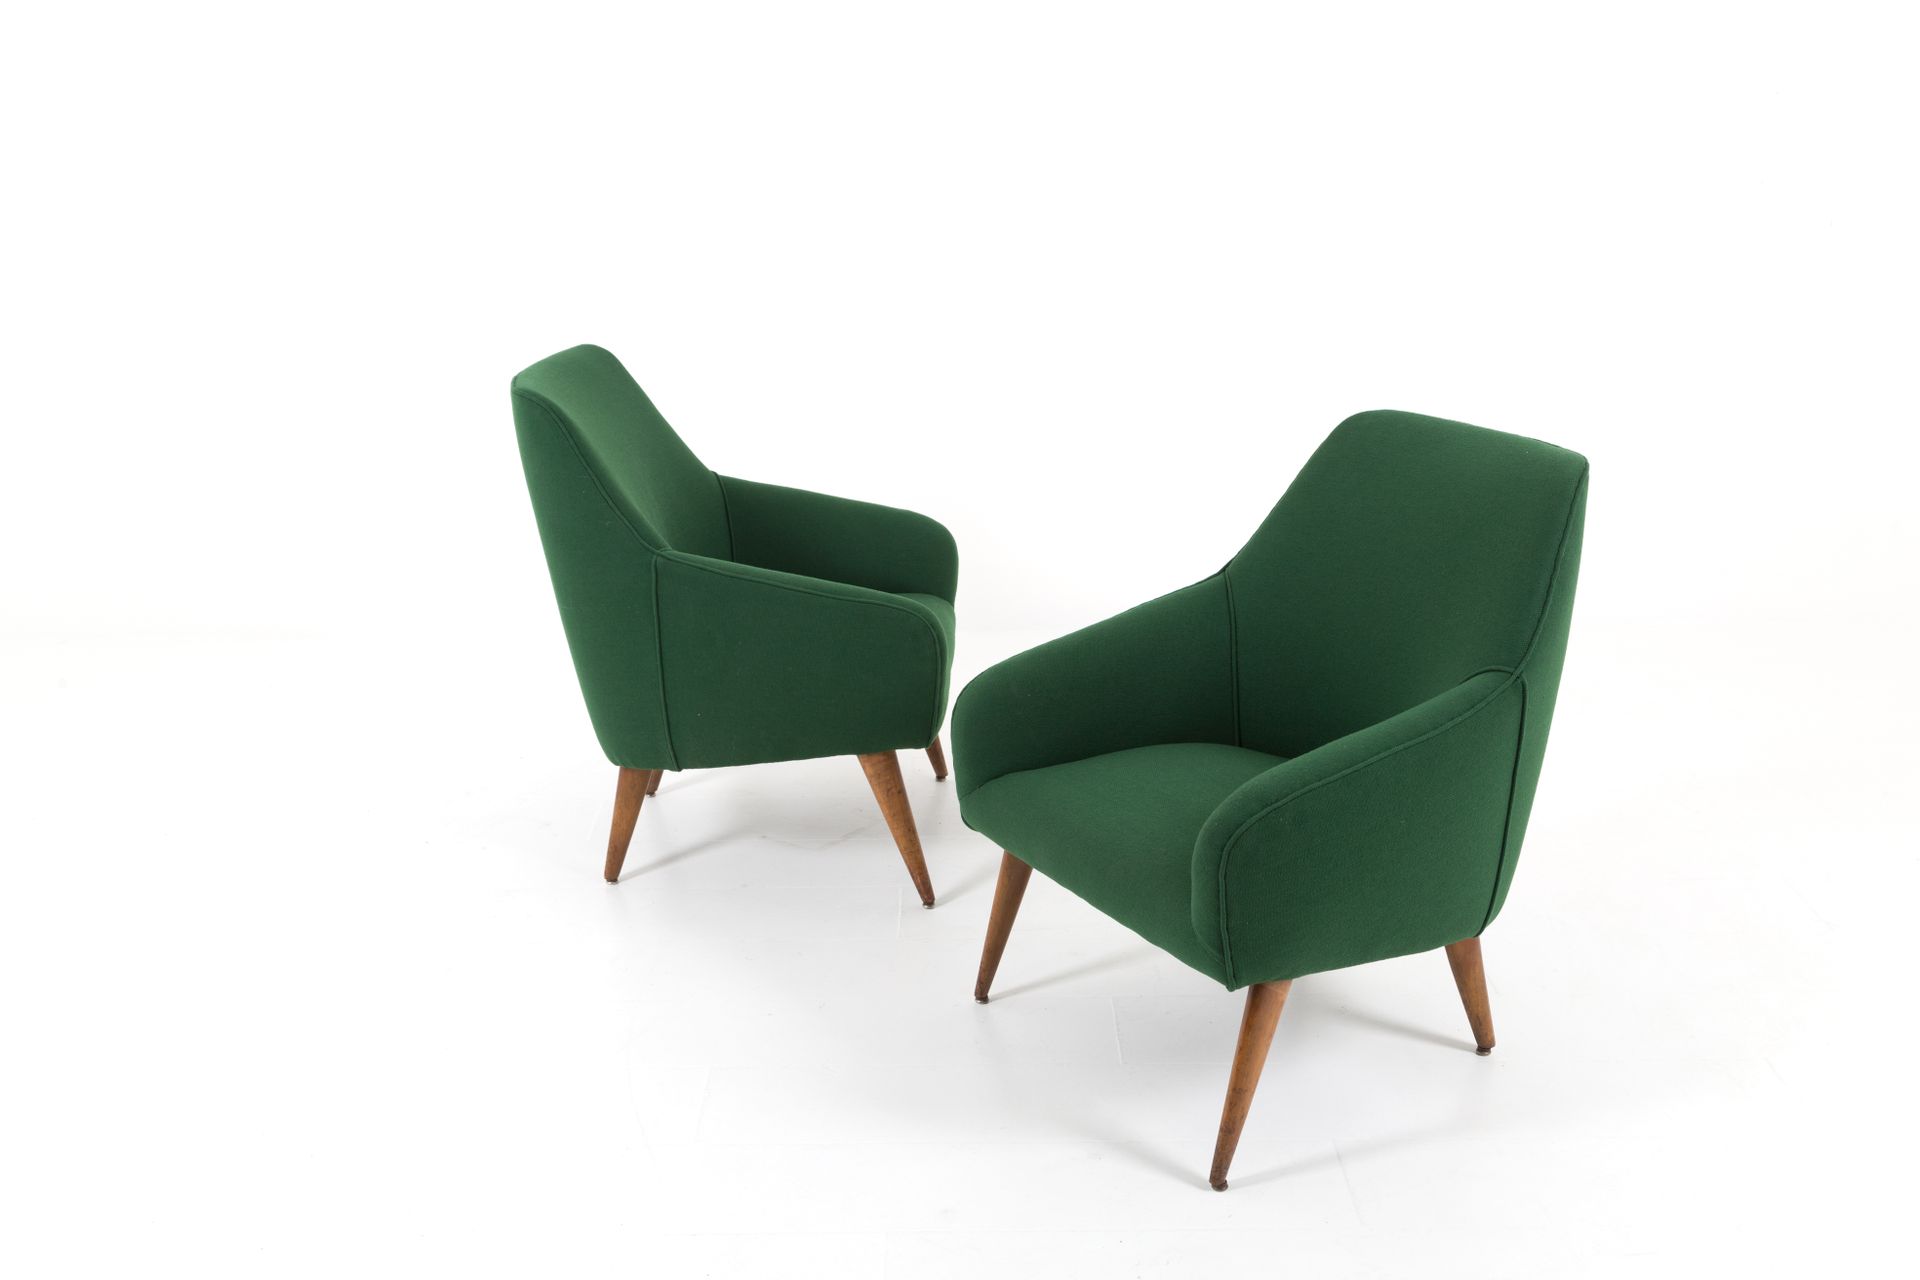 GIO PONTI for CASSINA. Pair of wooden armchairs GIO PONTI (Mailand, 1891-1979) f&hellip;